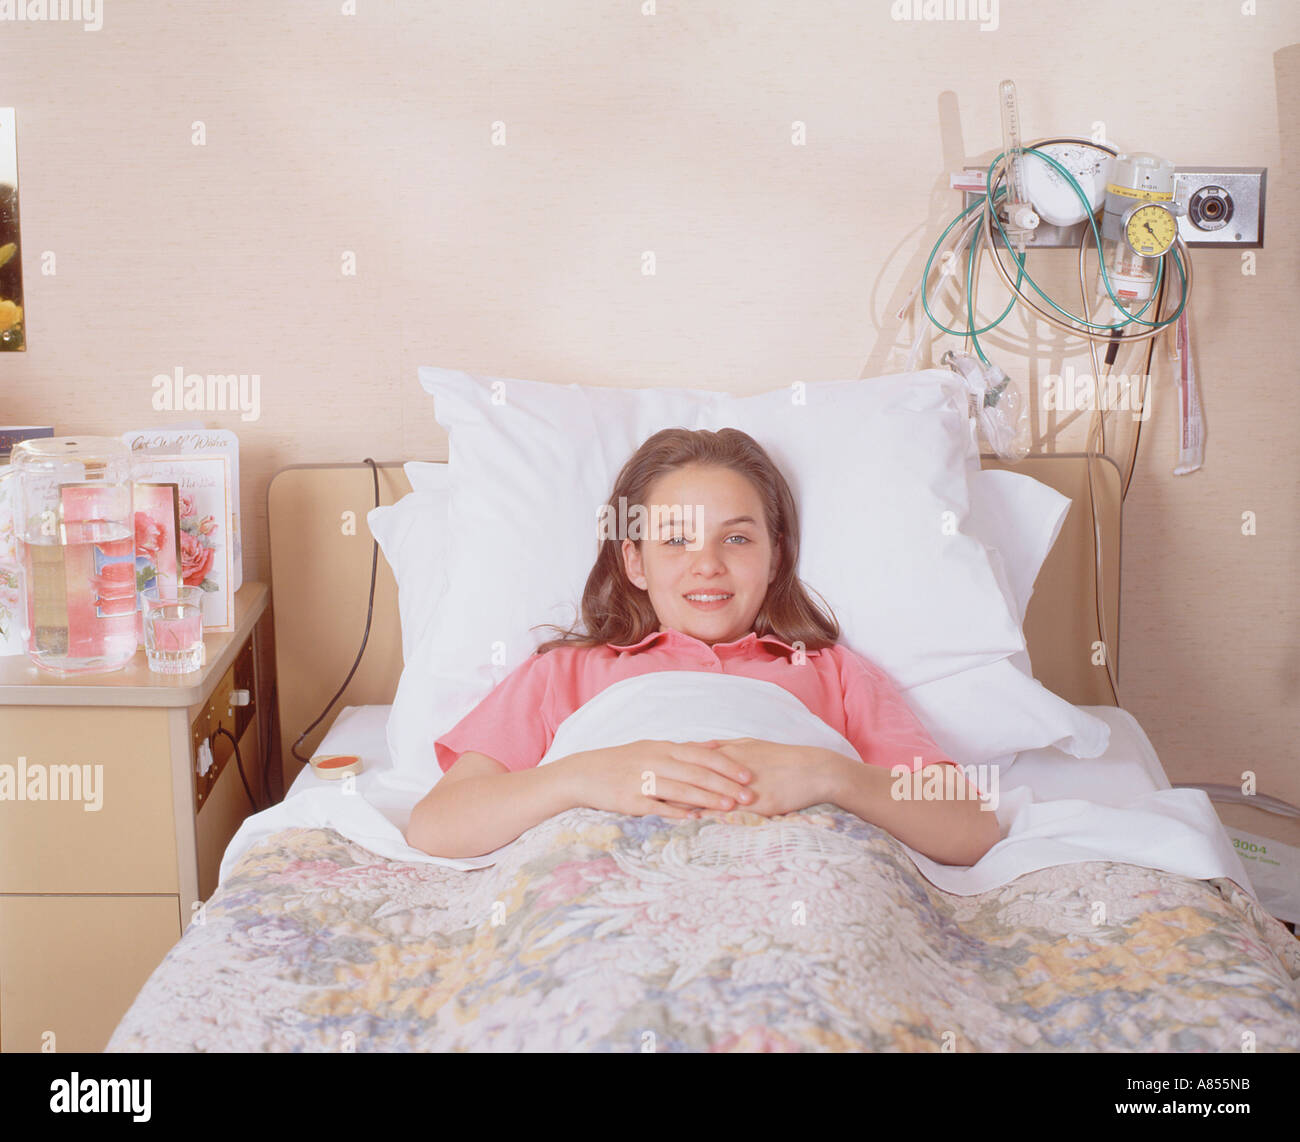 Hospital Paediatrics unit. Young girl child patient in bed. Stock Photo